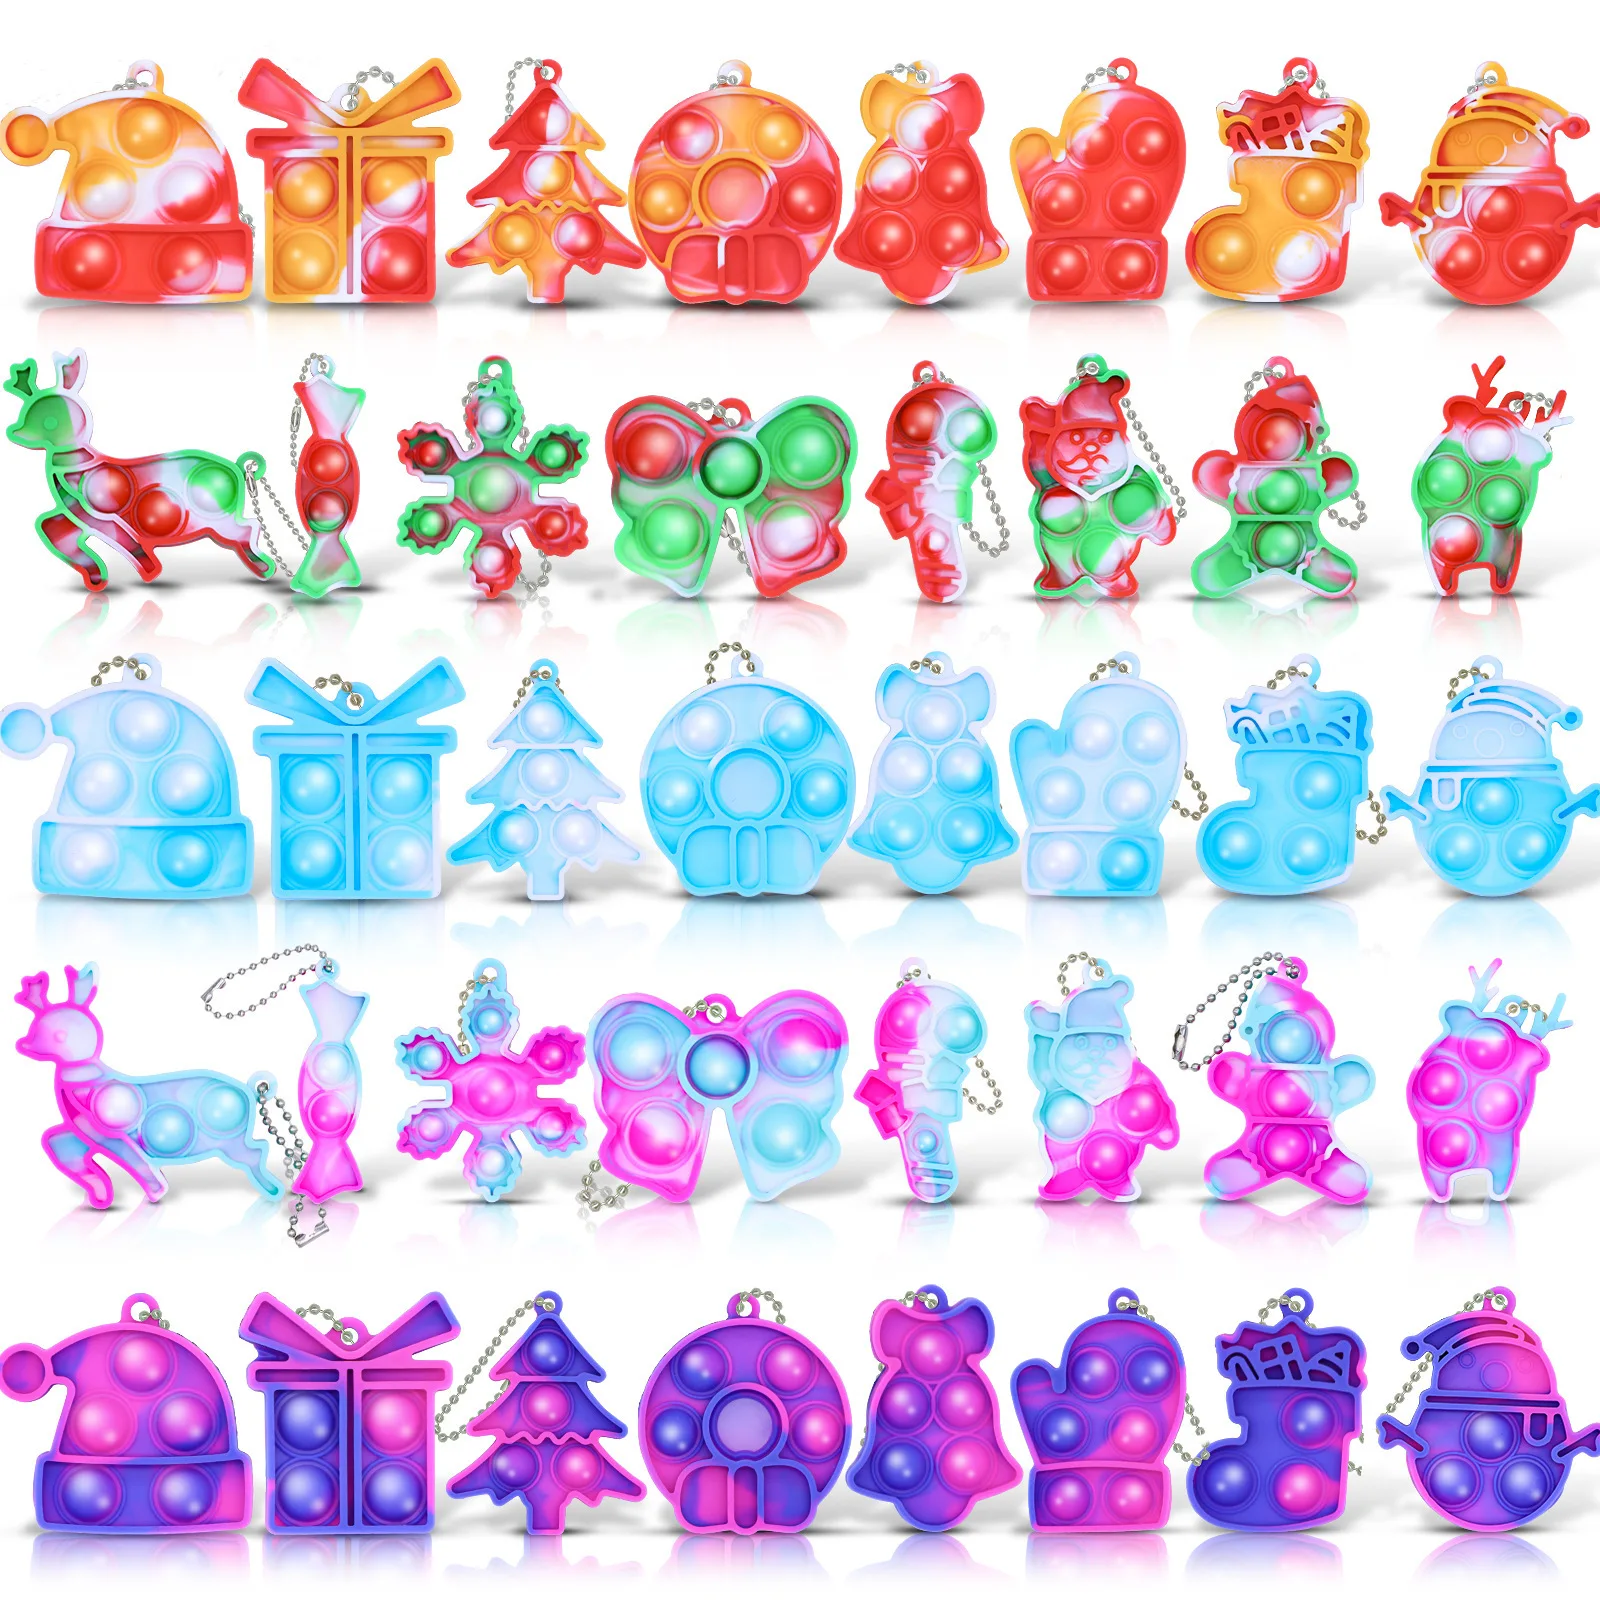 

6 pieces of Christmas bubble keychains, rodent killer pioneer keychains, Santa Claus soft rubber key pendant fingertips